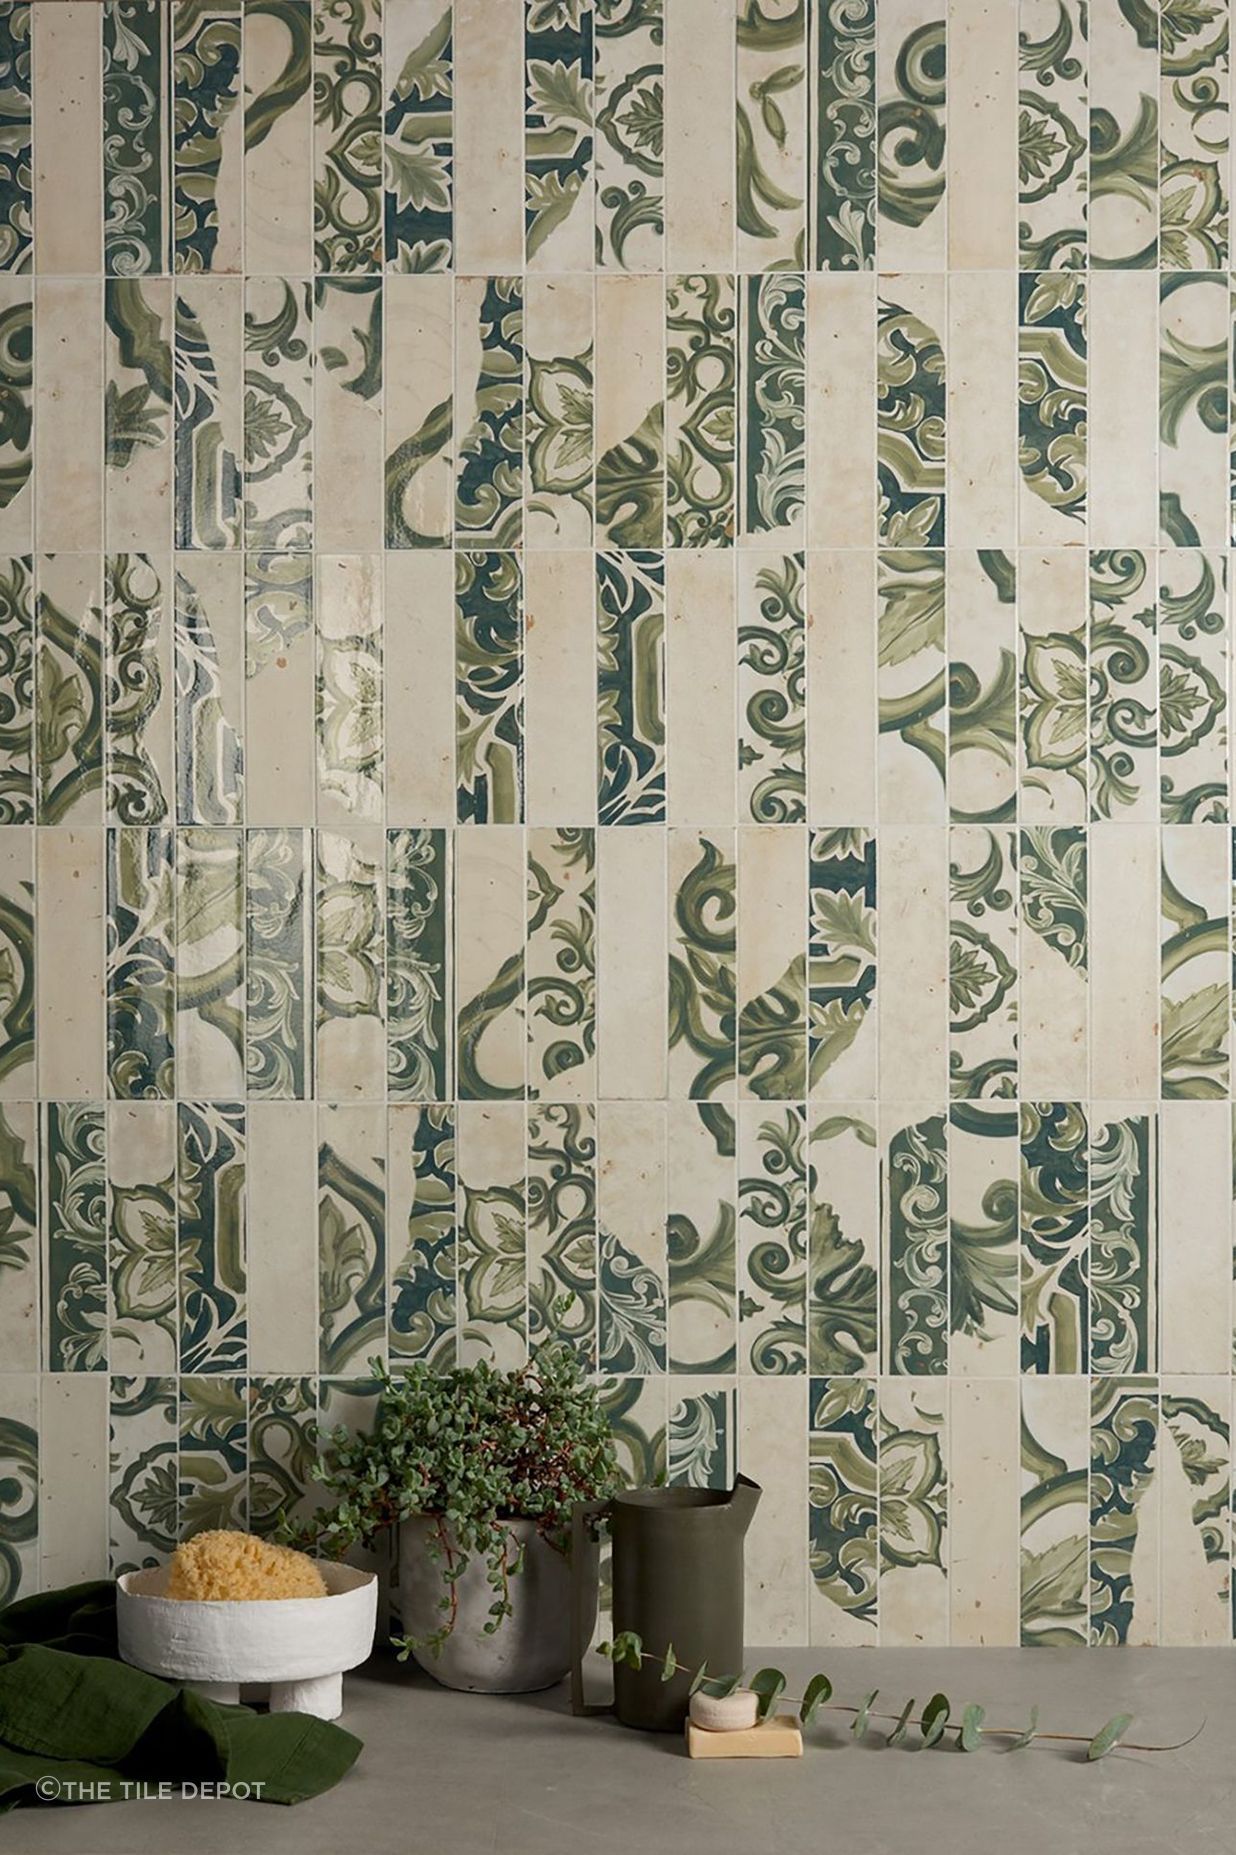 Designed and made in Italy, FREGIO is a decorative wall tile collection that skilfully captures the patterns and colours of Mediterranean Majolica pottery.